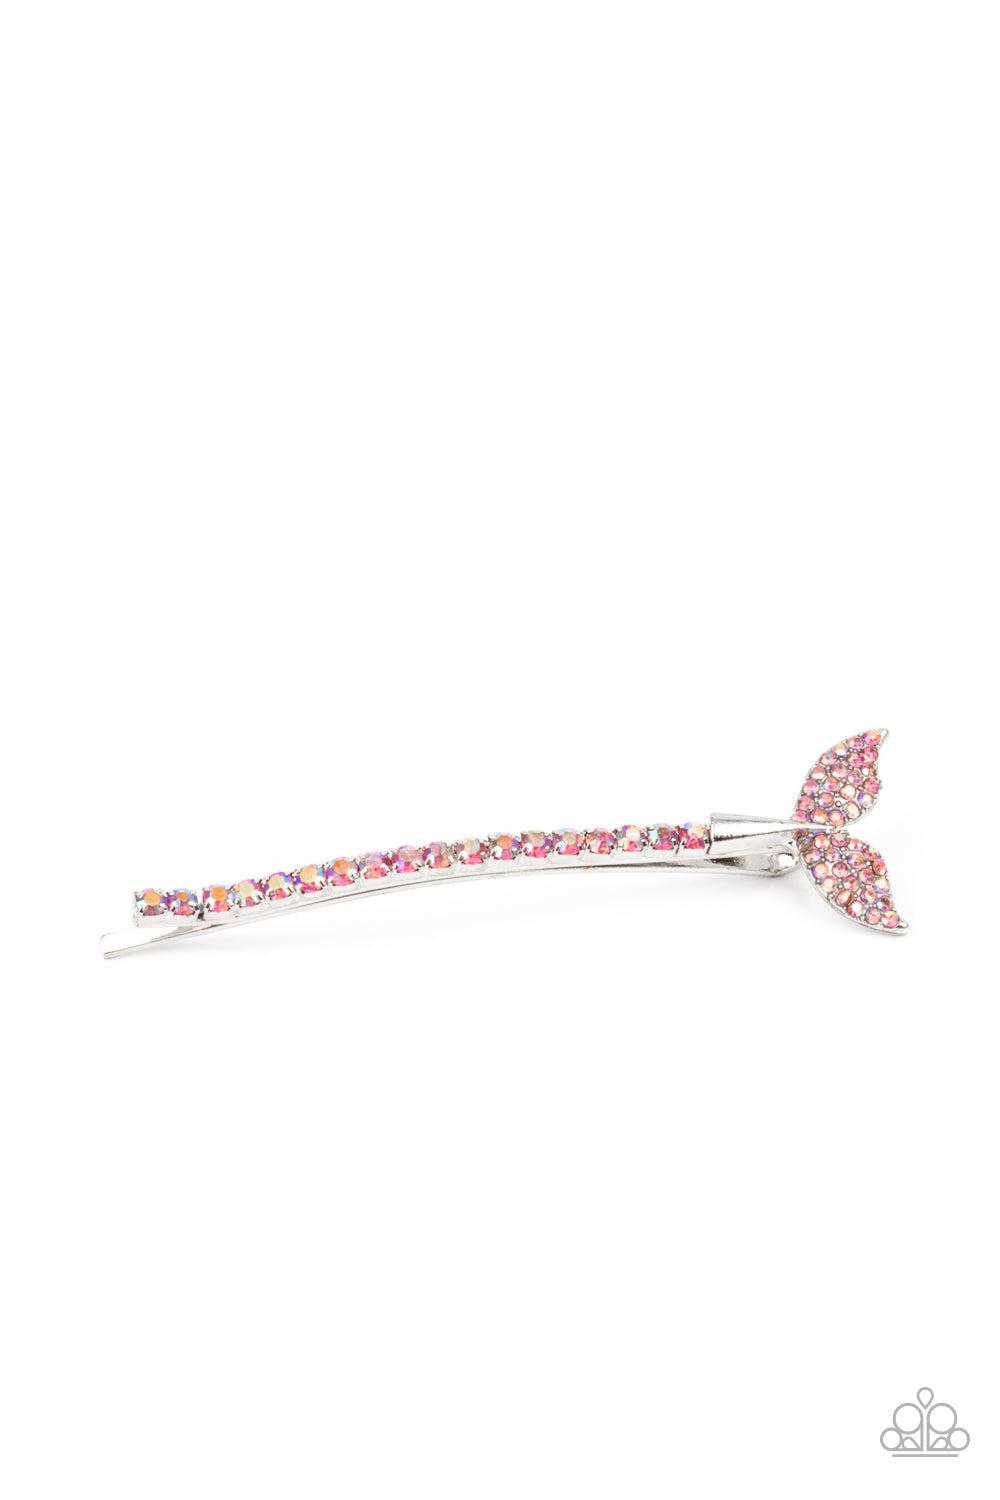 Deep Dive Pink Mermaid Tail Hair Pin - Paparazzi Accessories-on model - CarasShop.com - $5 Jewelry by Cara Jewels